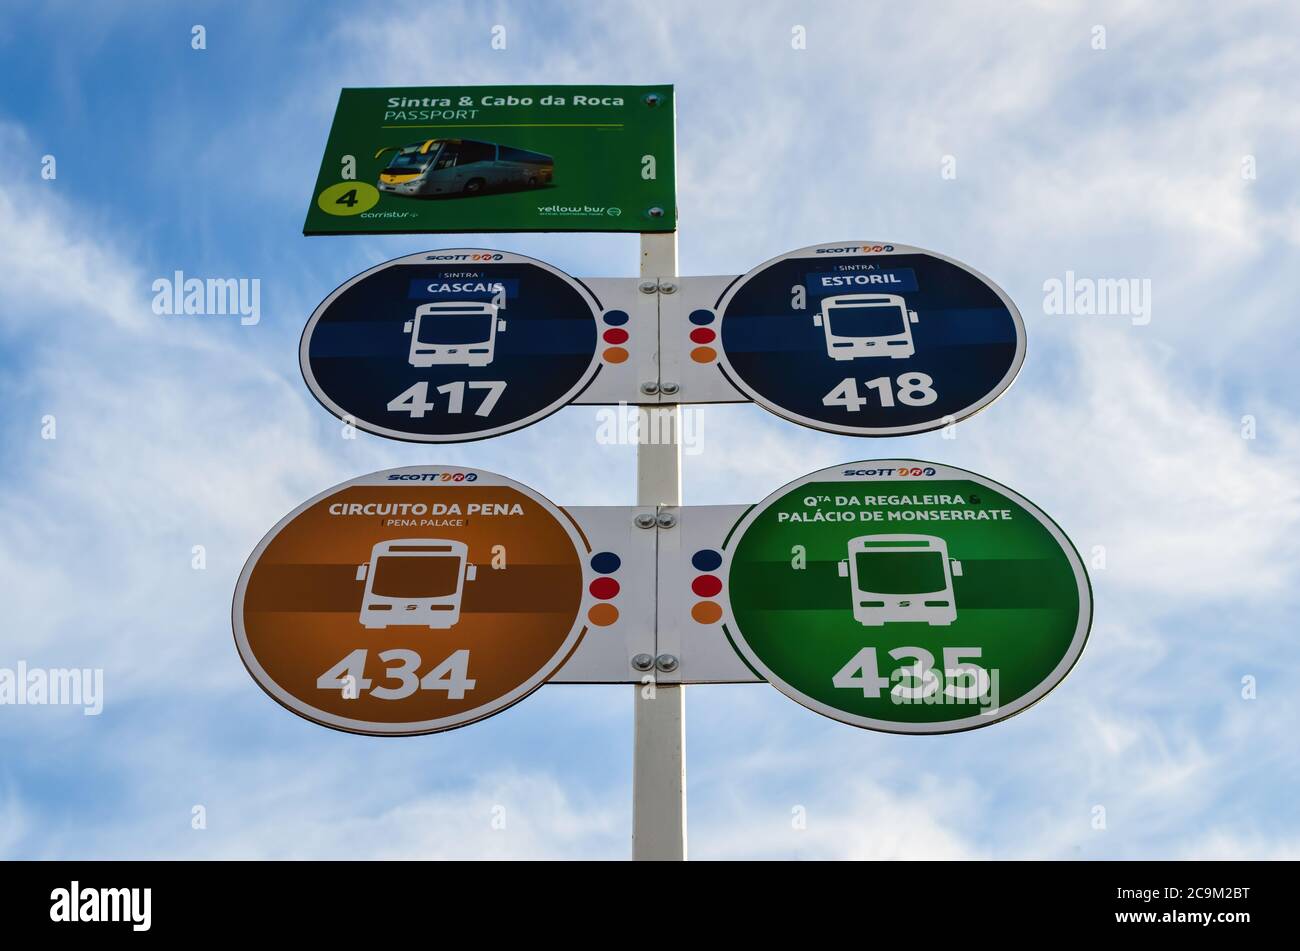 Sintra, Portugal February 5 2019: Bus stop sign in Sintra, Portugal, on february 5, 2019, with different lines for landmark and tourist destinations l Stock Photo